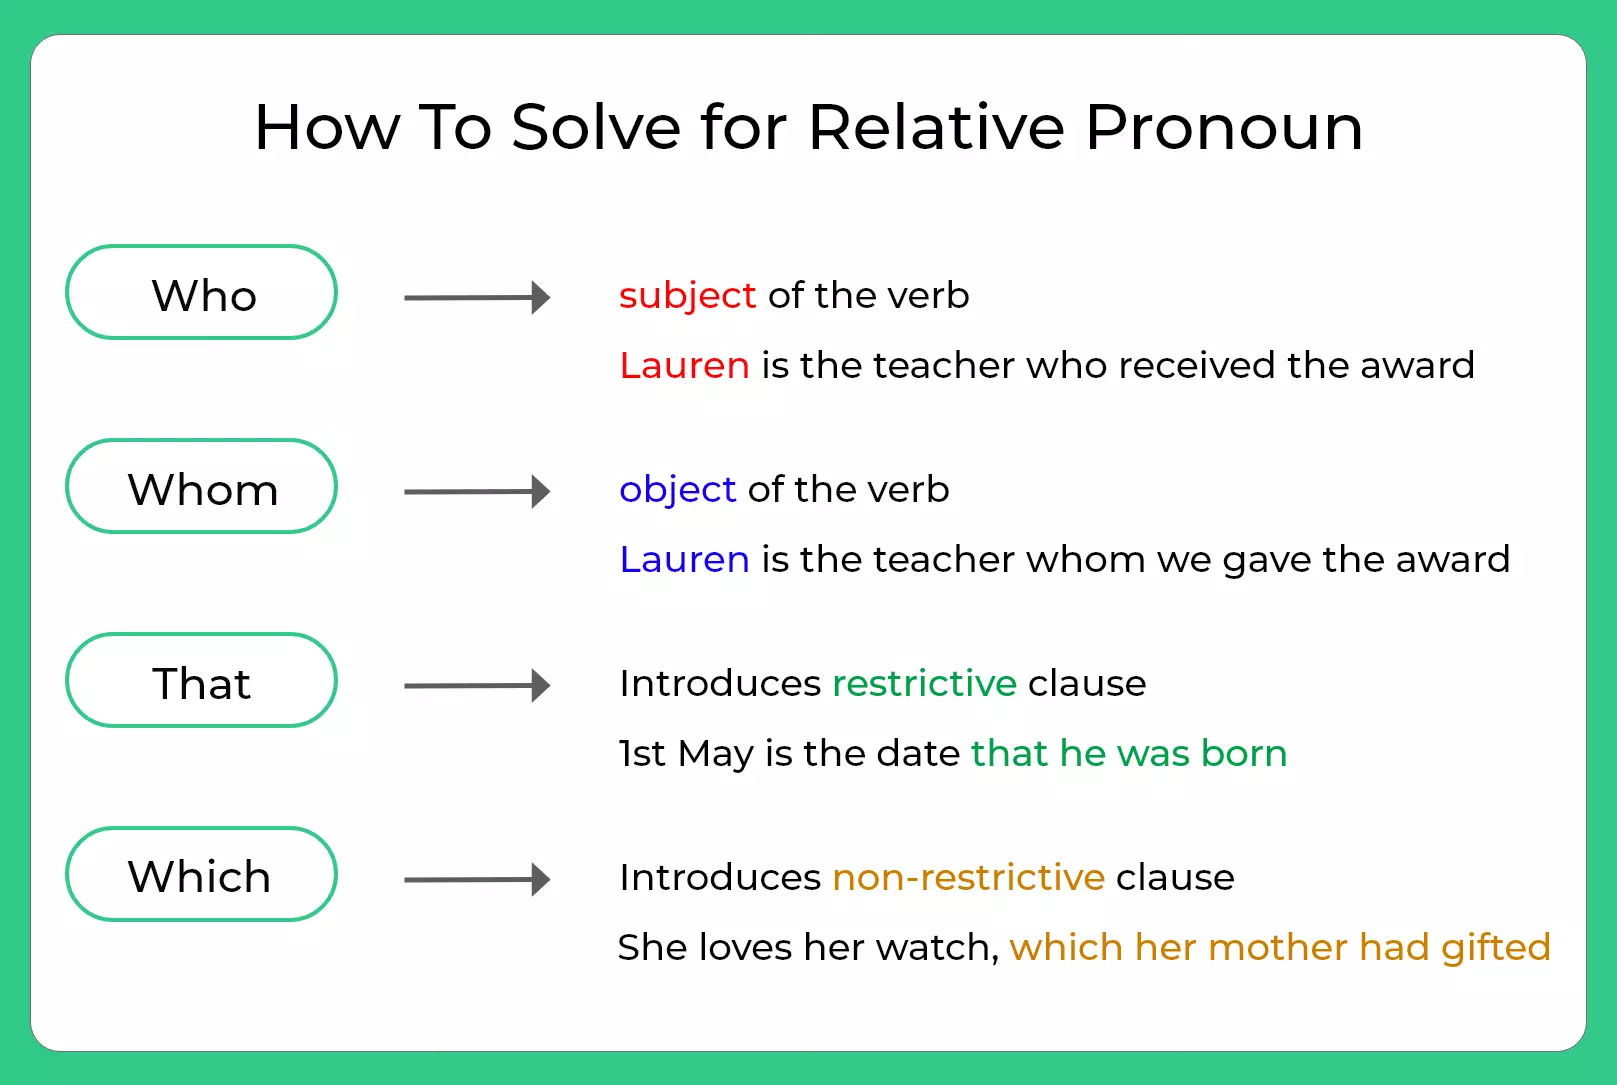 How To Solve for Relative Pronoun